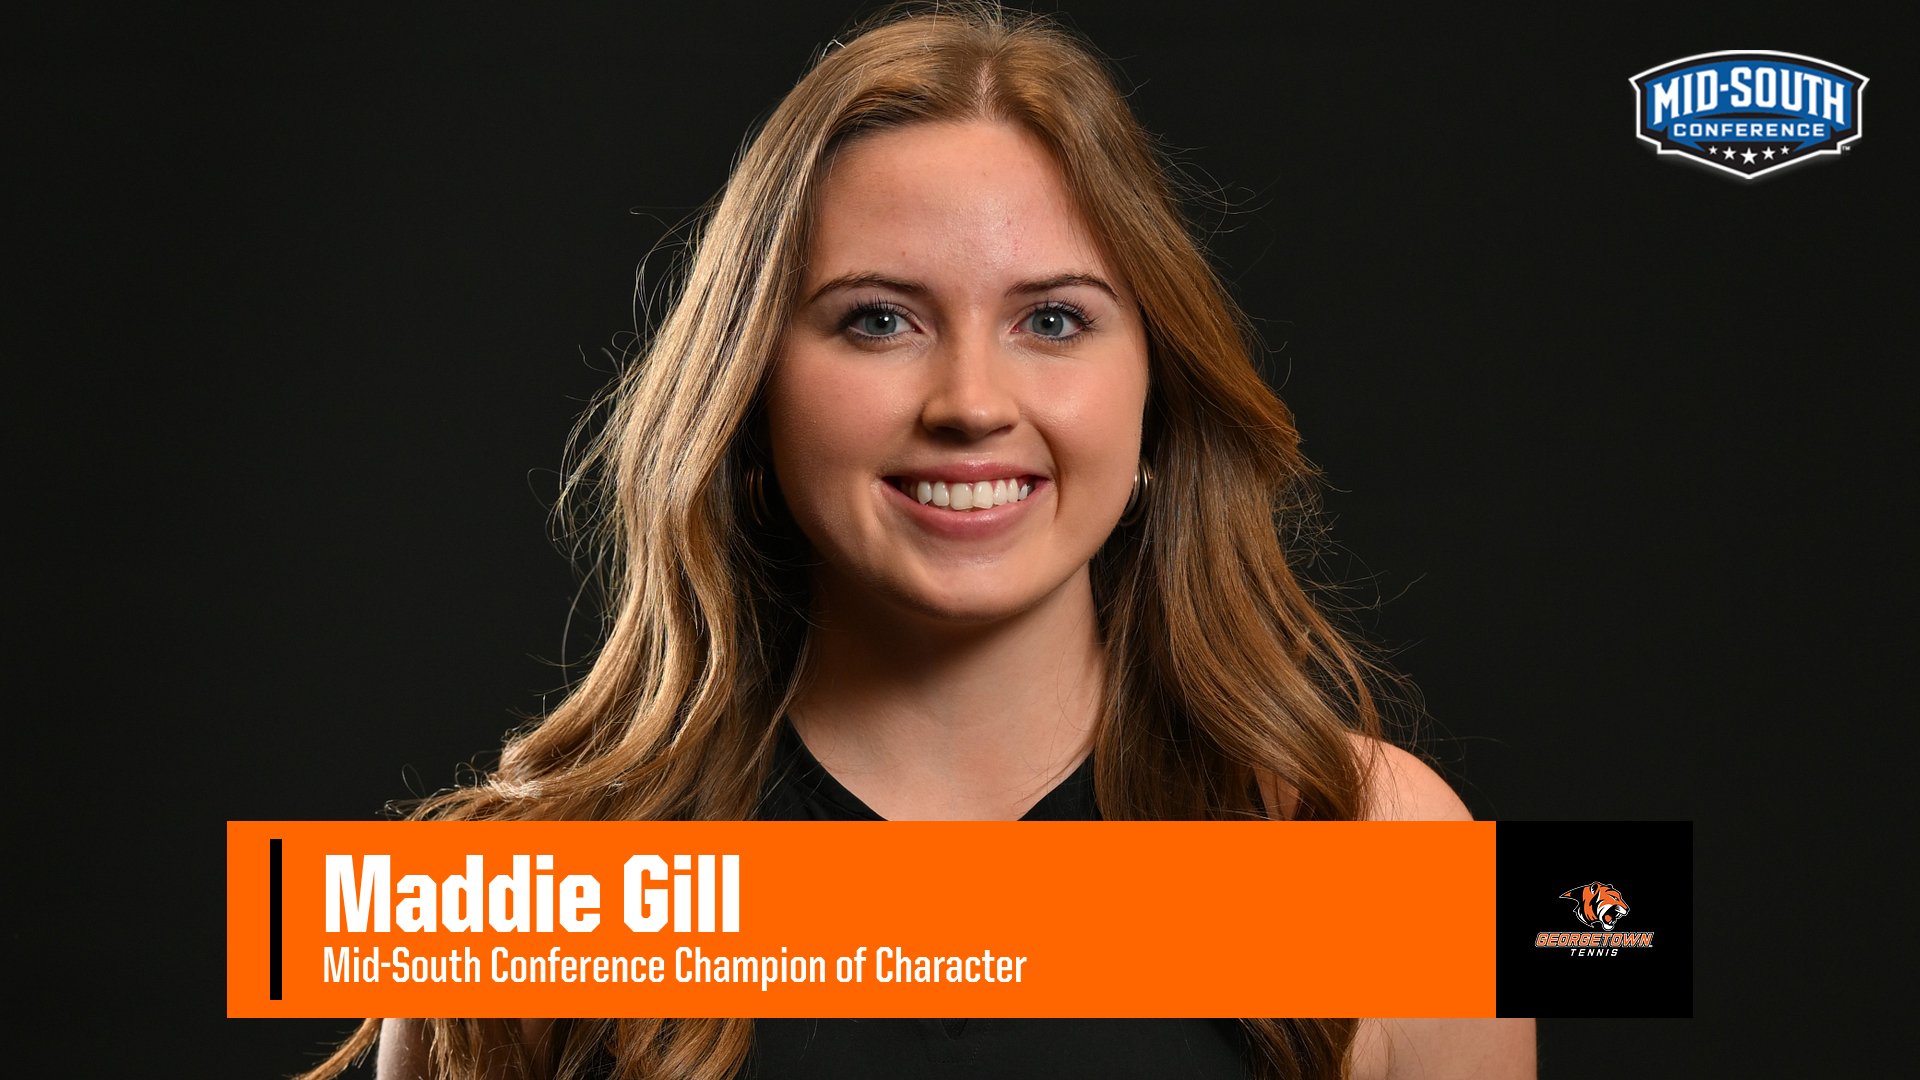 Maddie Gill named MSC Champion of Character